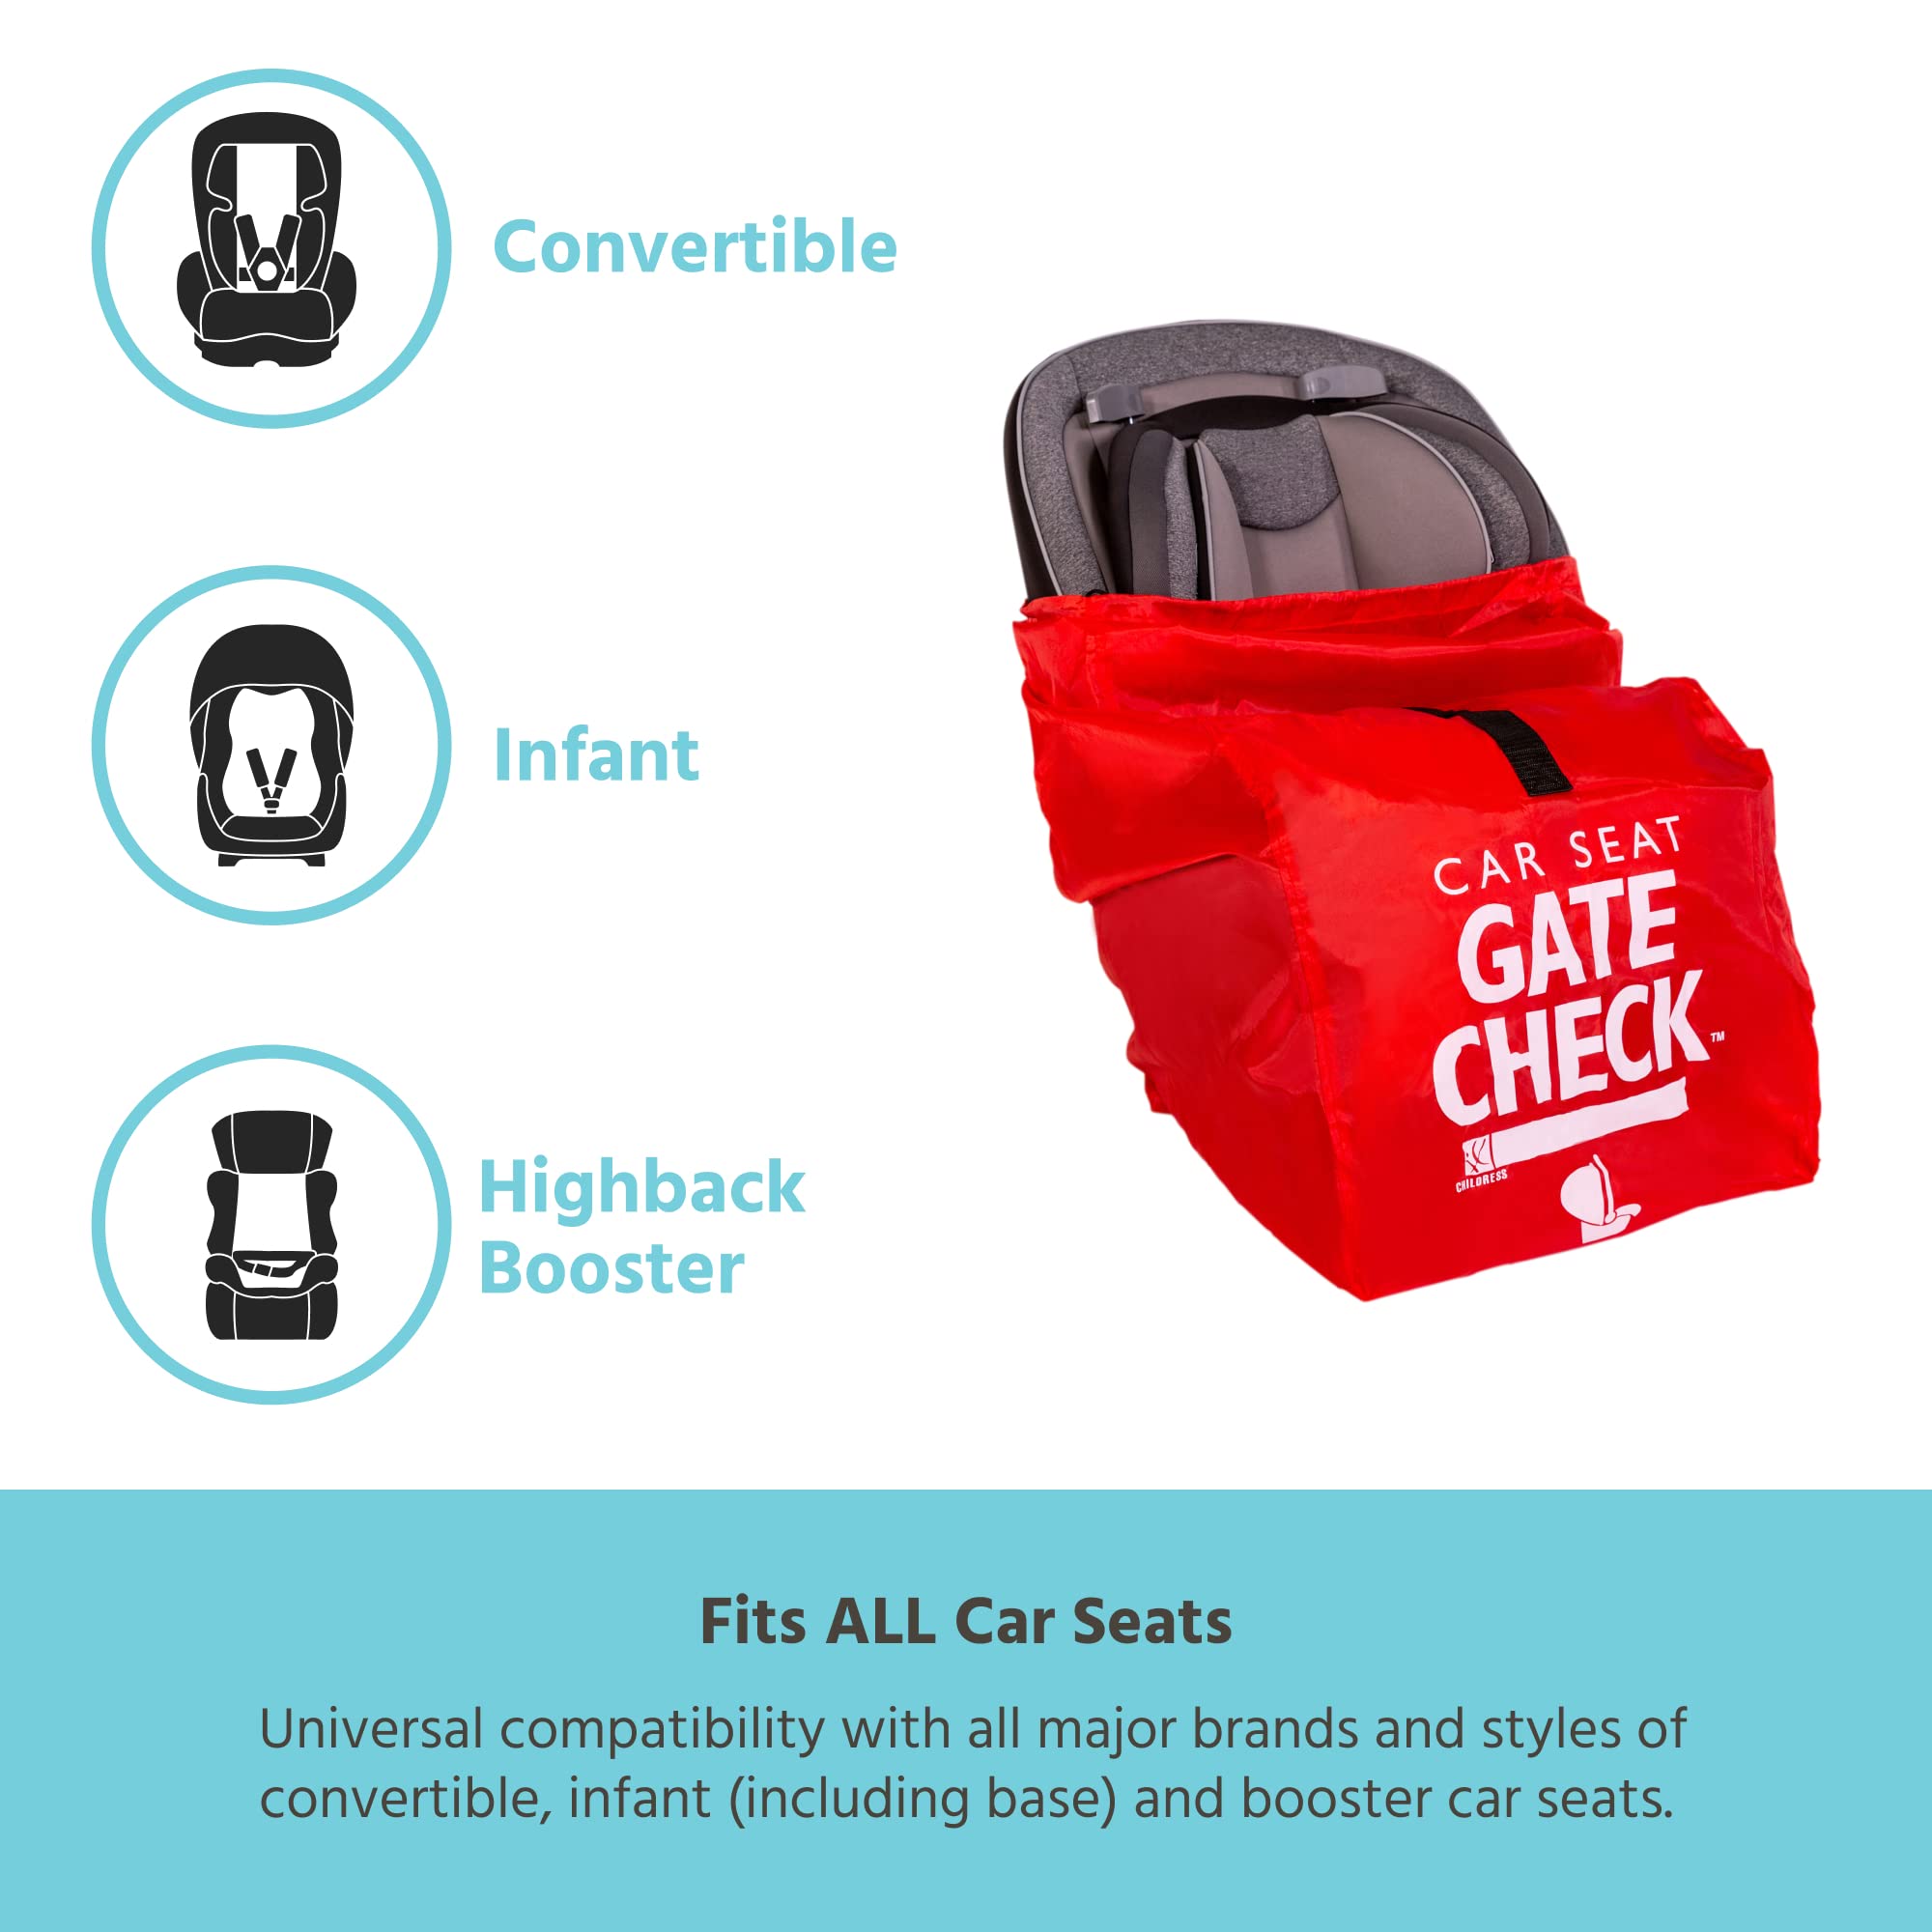 J.L. Childress Gate Check Bag - Air Travel Bag - Fits Convertible Car Seats, Infant carriers & Booster Seats, Red